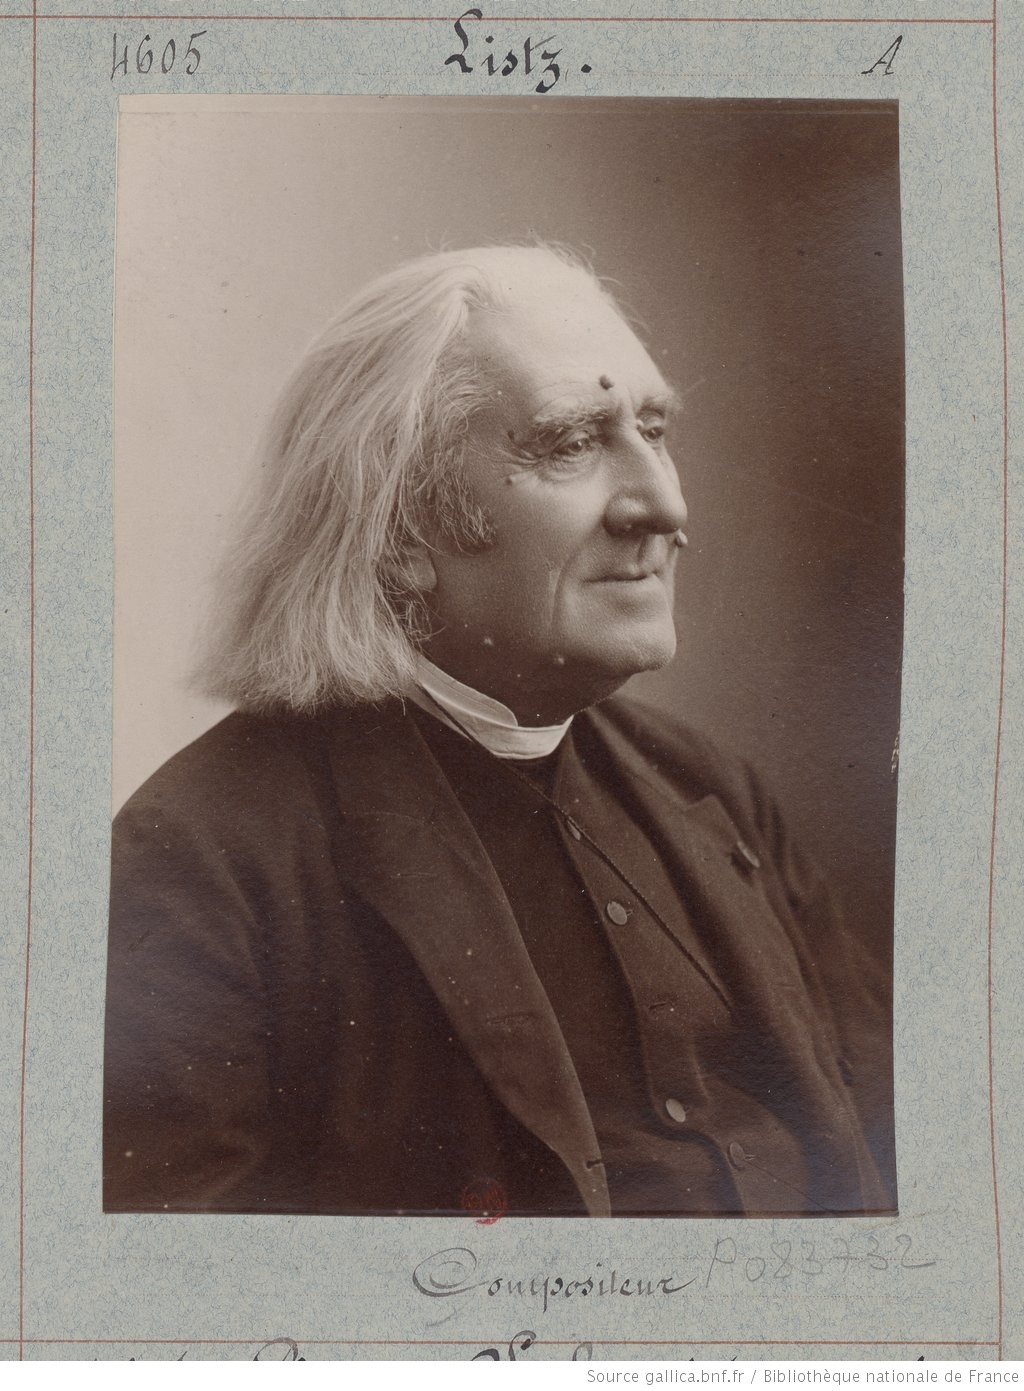 Liszt portrait number 6 in black and white taken by Nadar